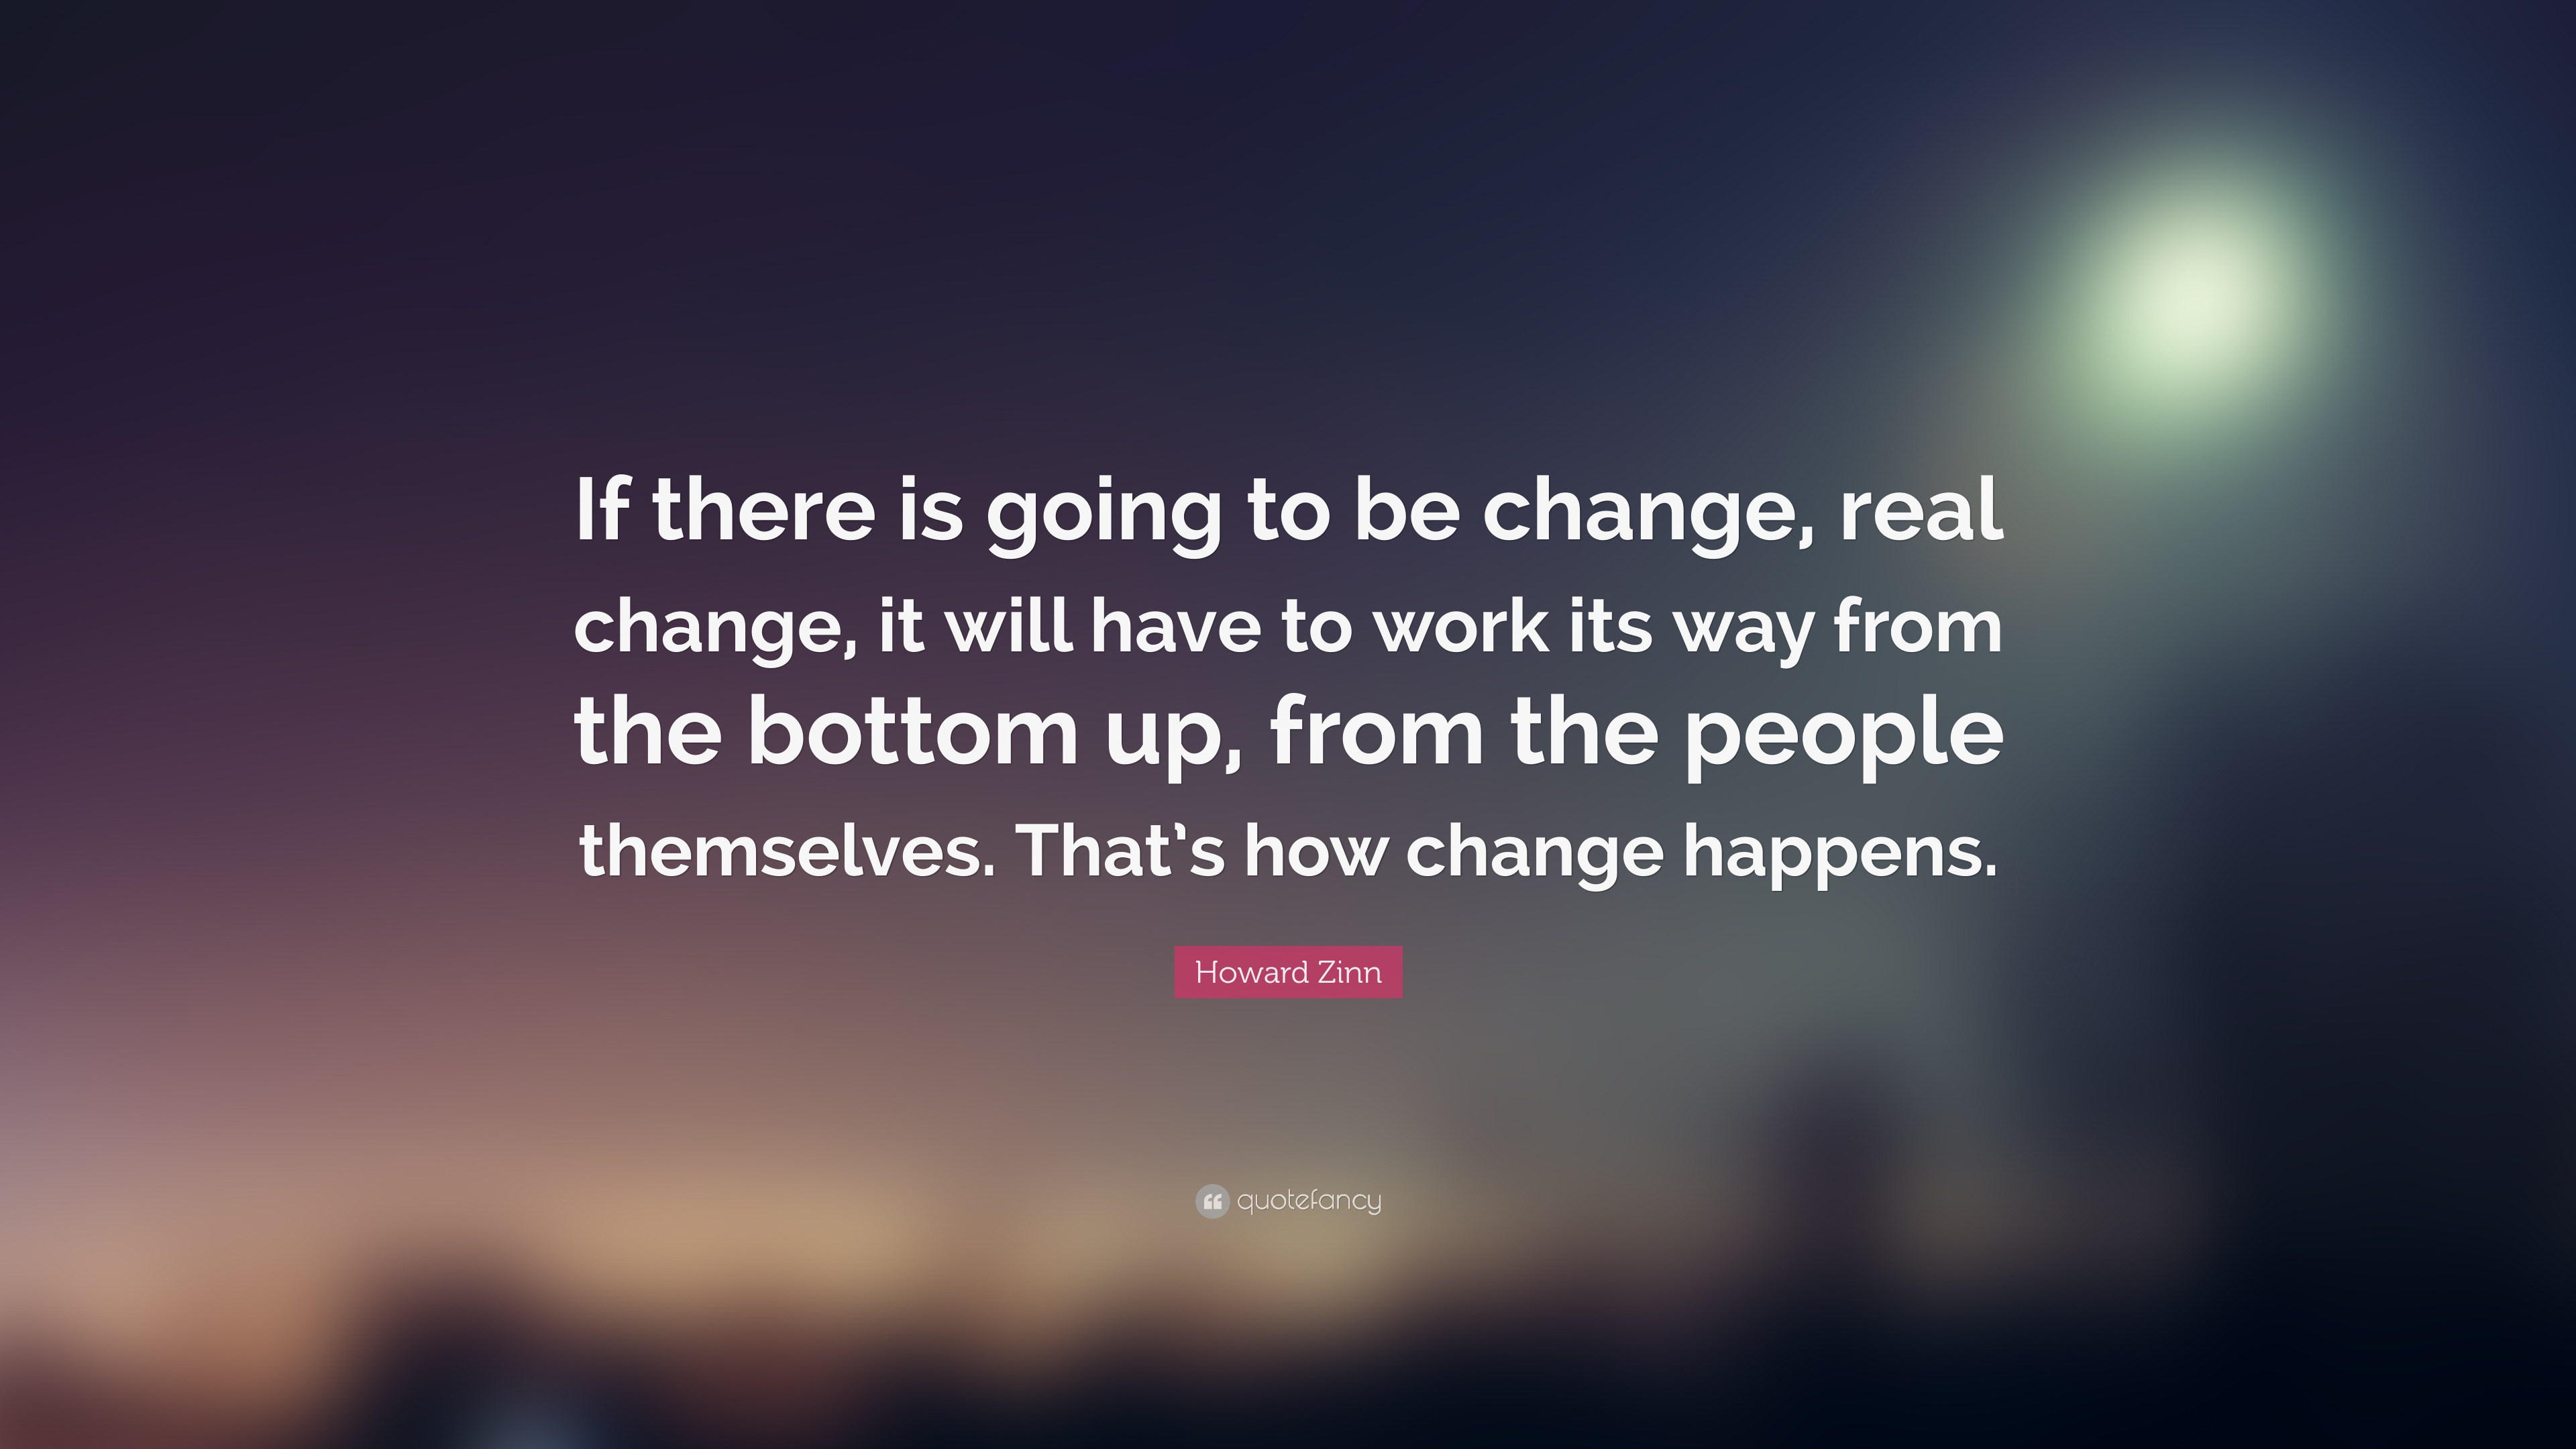 Howard Zinn Quote: “If there is going to be change, real change, it ...